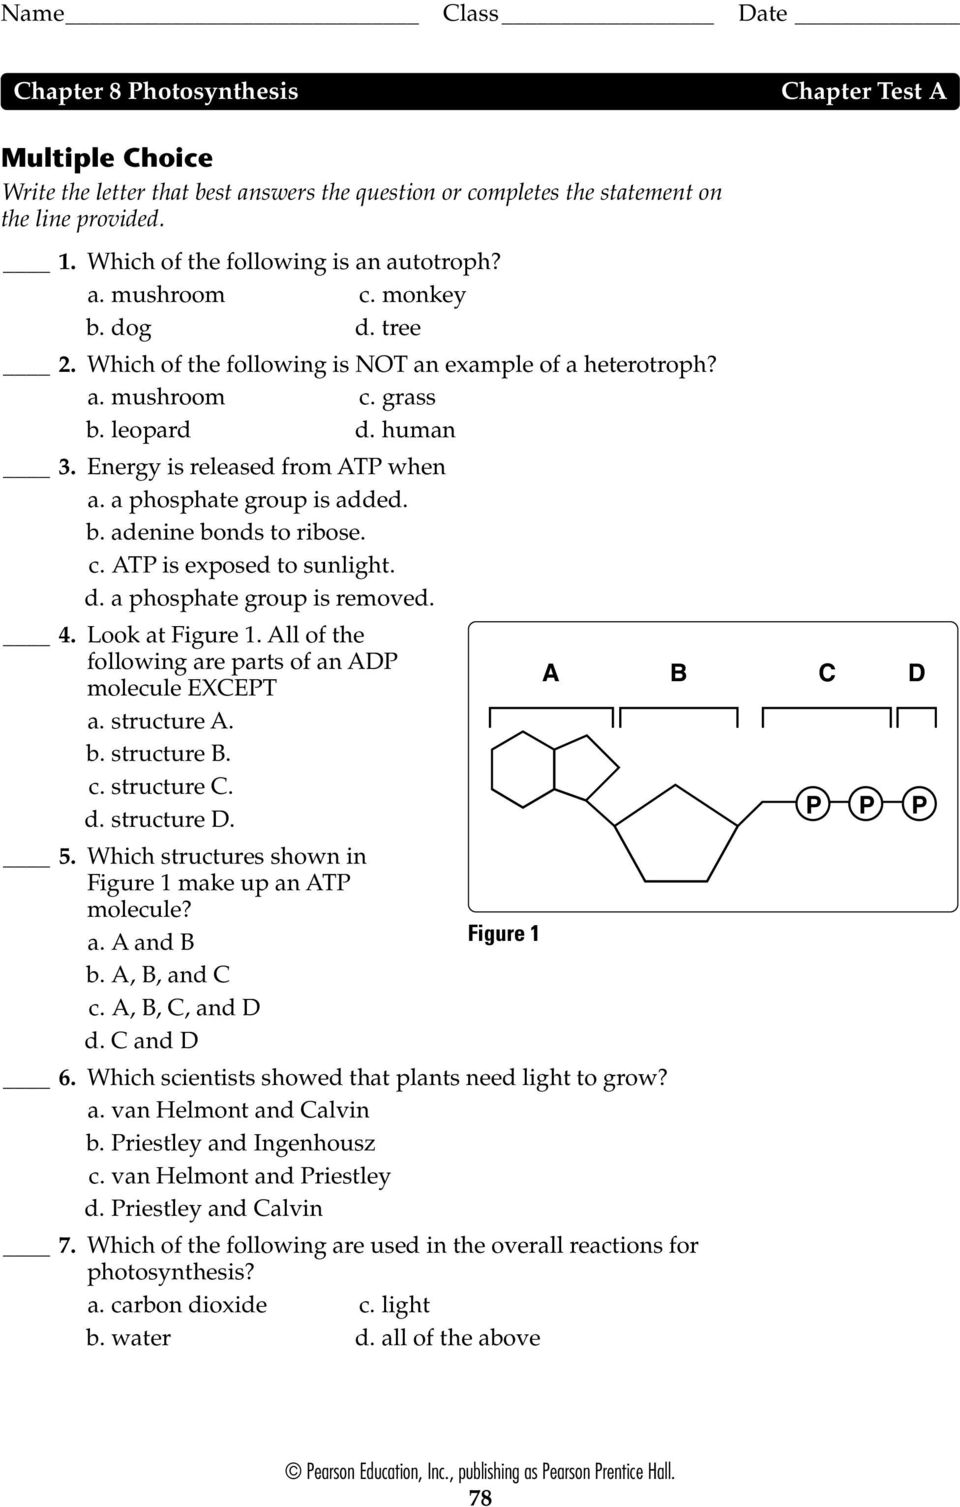 c. ATP is exposed to sunlight. d. a phosphate group is removed. 4. Look at Figure 1. All of the following are parts of an ADP molecule EXCEPT A B C D a. structure A. b. structure B. c. structure C. d. structure D.